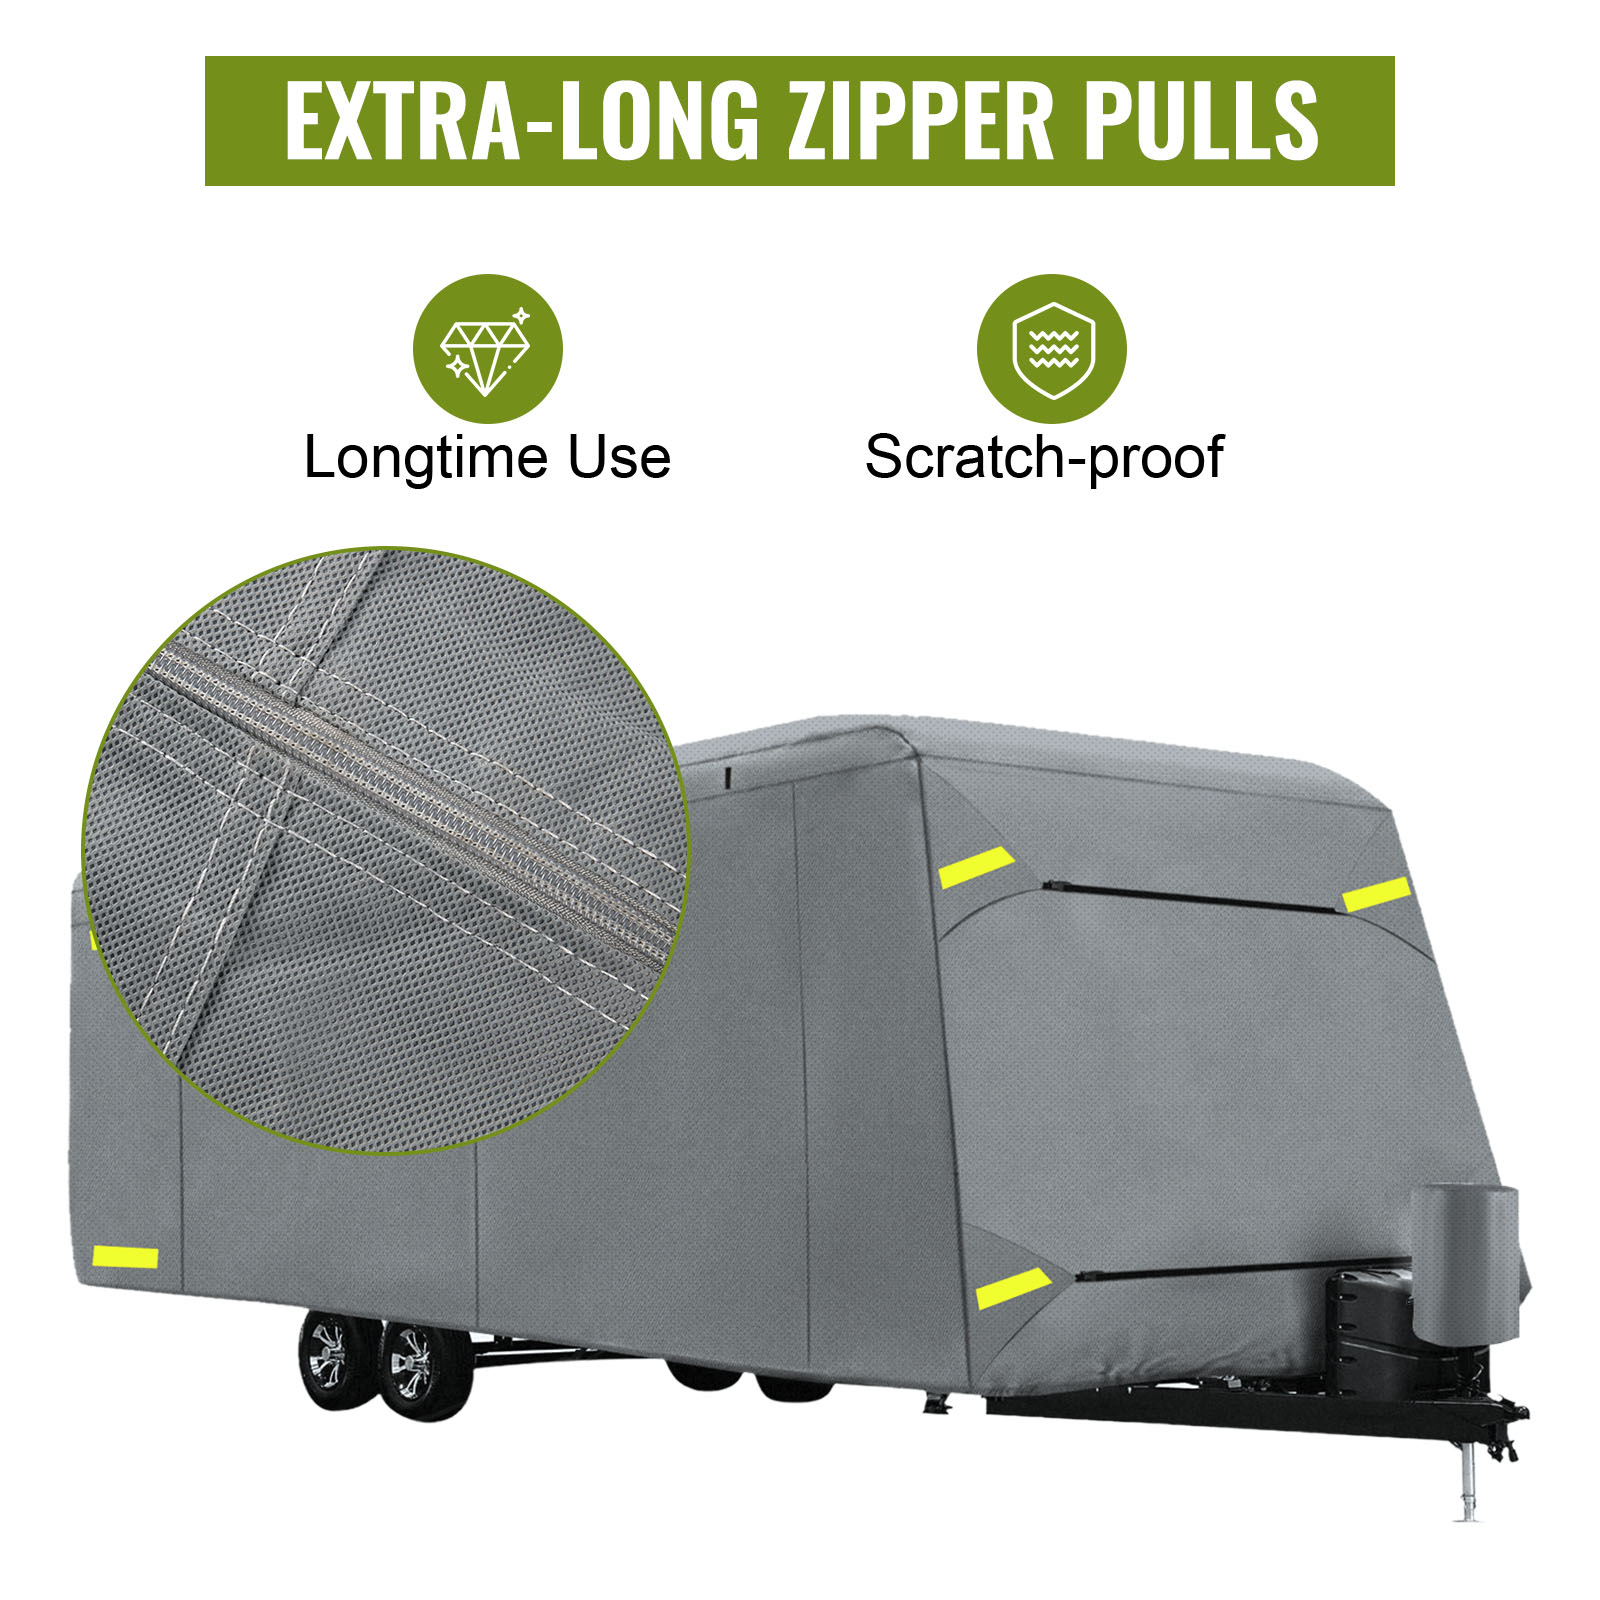 Travel Trailer RV Cover,Waterproof & Windproof Camper Cover Fits 16~18FT RV  Trailer,Upgraded 420D Heavy Duty Polyester Oxford Durable, UV, Water